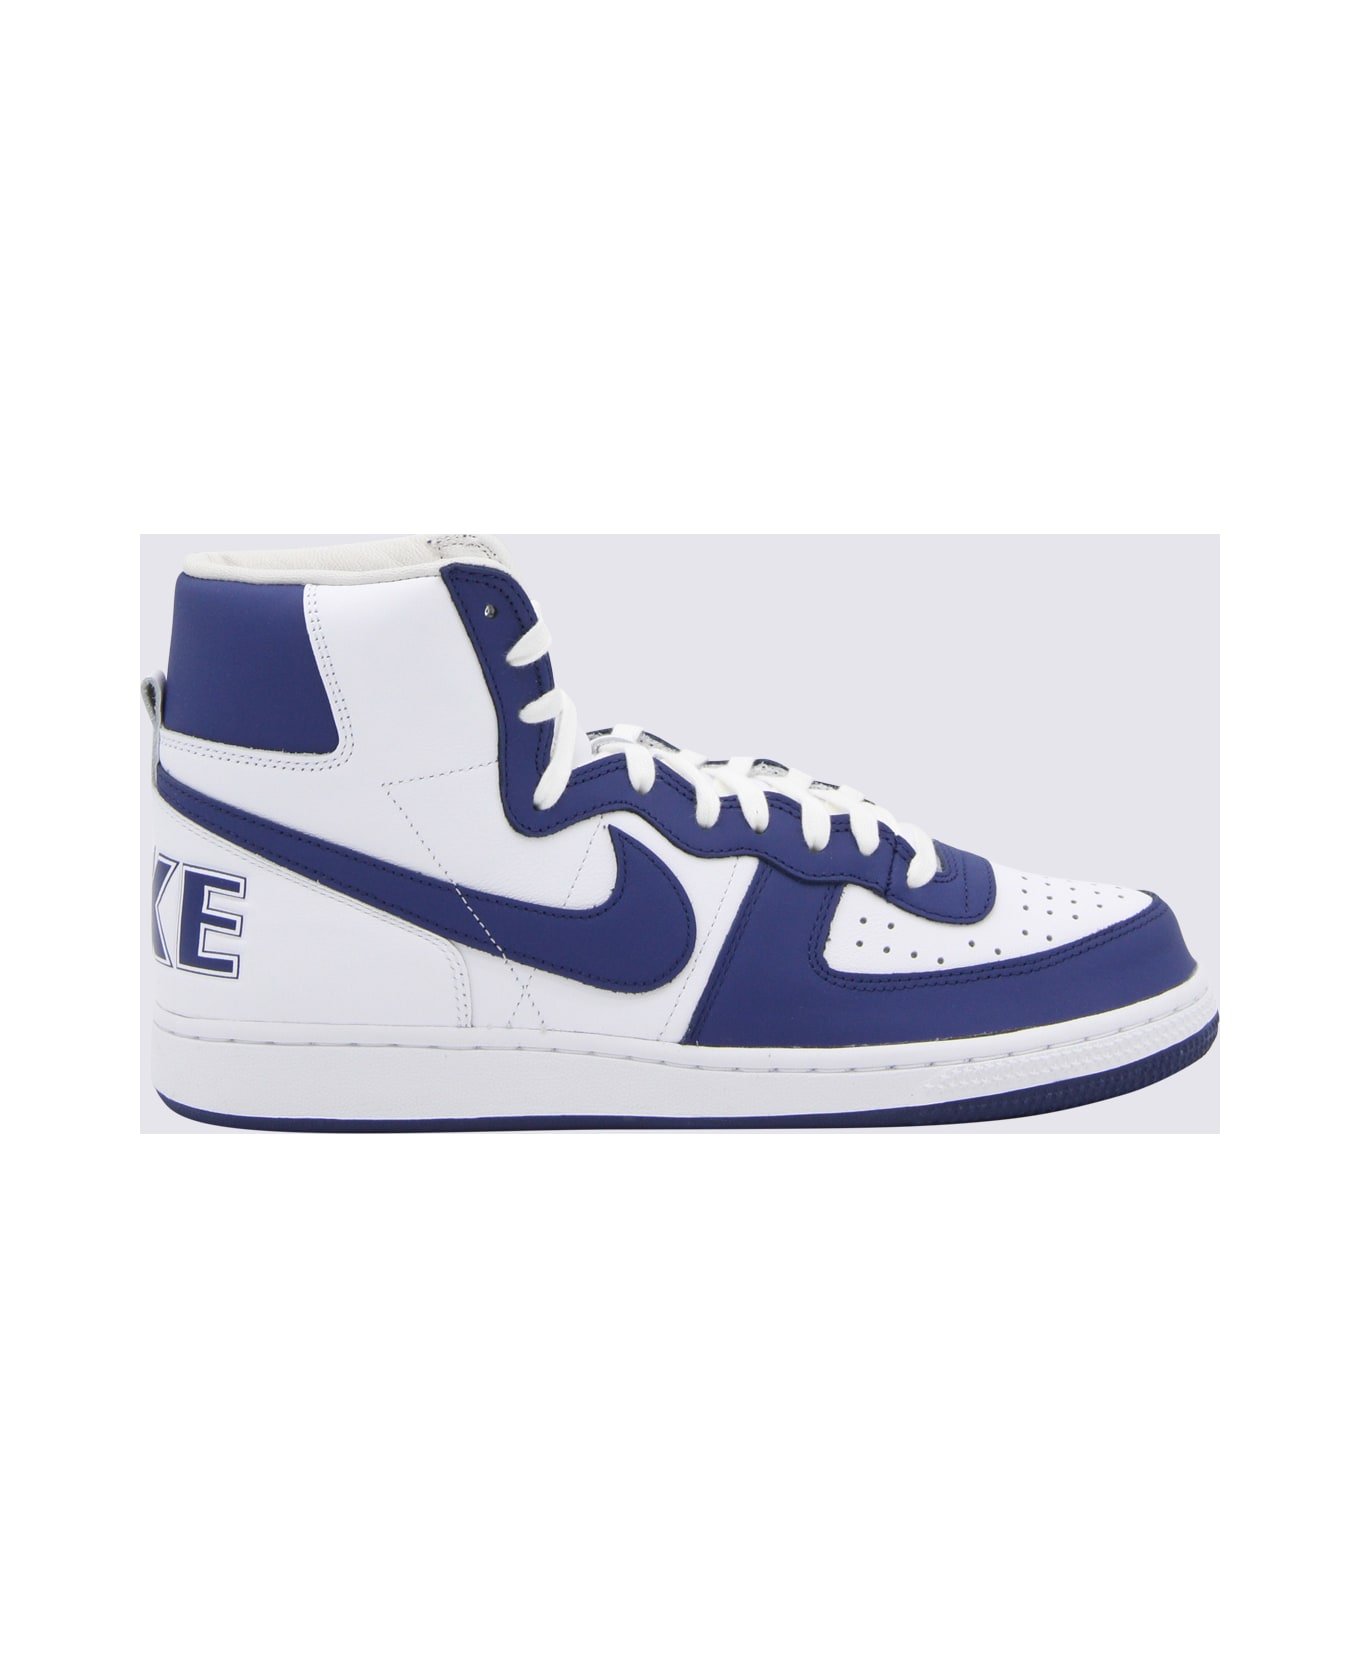 Comme des Garçons White And Blue Leather Sneakers - Blue